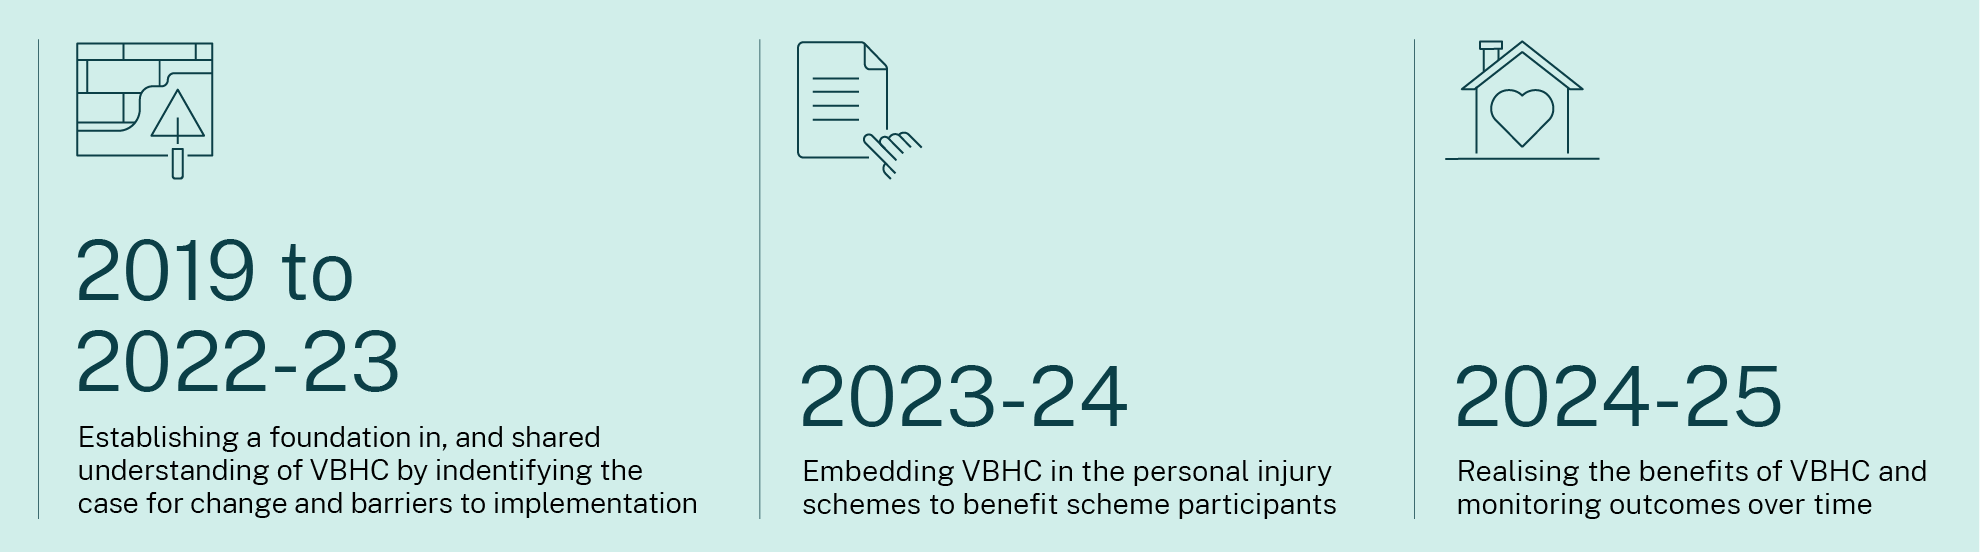  2019 to 2022–23; Establishing a foundation in, and shared understanding of VBHC by identifying the case for change and barriers to implementation. 2023–24; Embedding VBHC in the personal injury schemes to benefit scheme participants.  2024–25; Realising the benefits of VBHC and monitoring outcomes over time